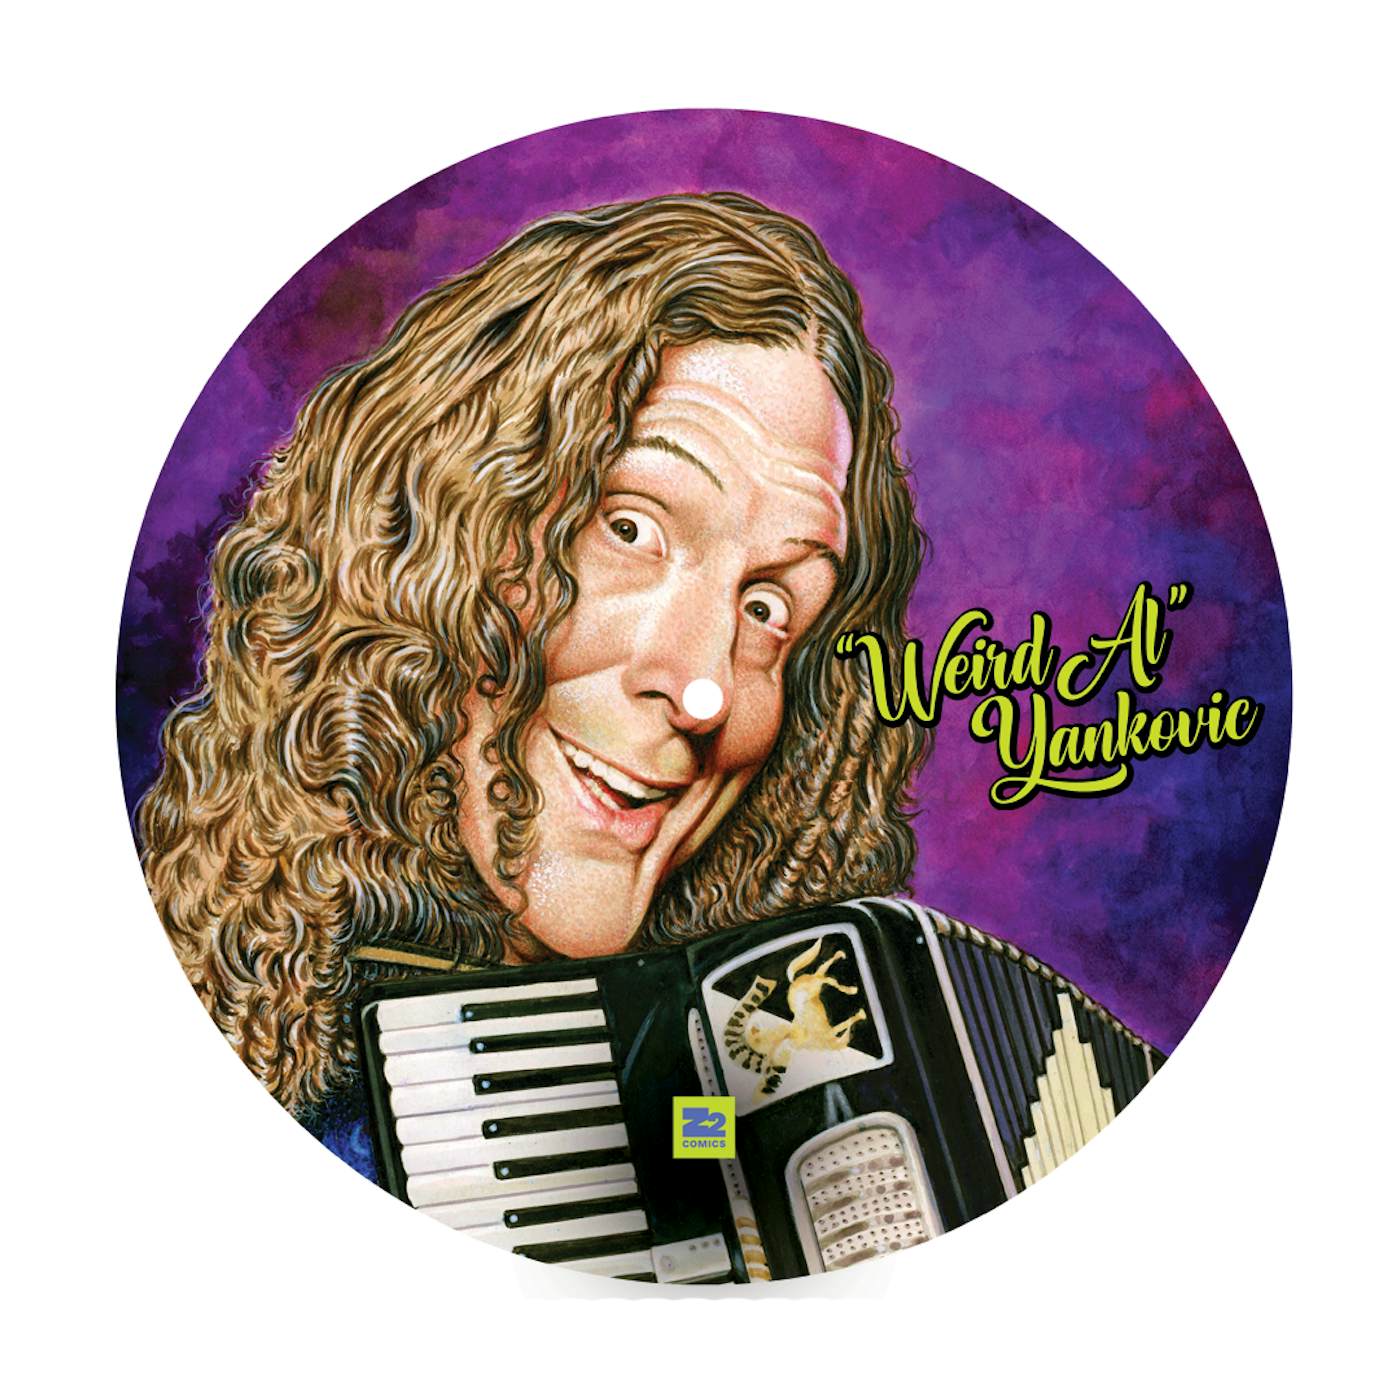 The Illustrated Al: The Songs of “"Weird Al" Yankovic” Yankovic - SIGNED Super Deluxe Bundle